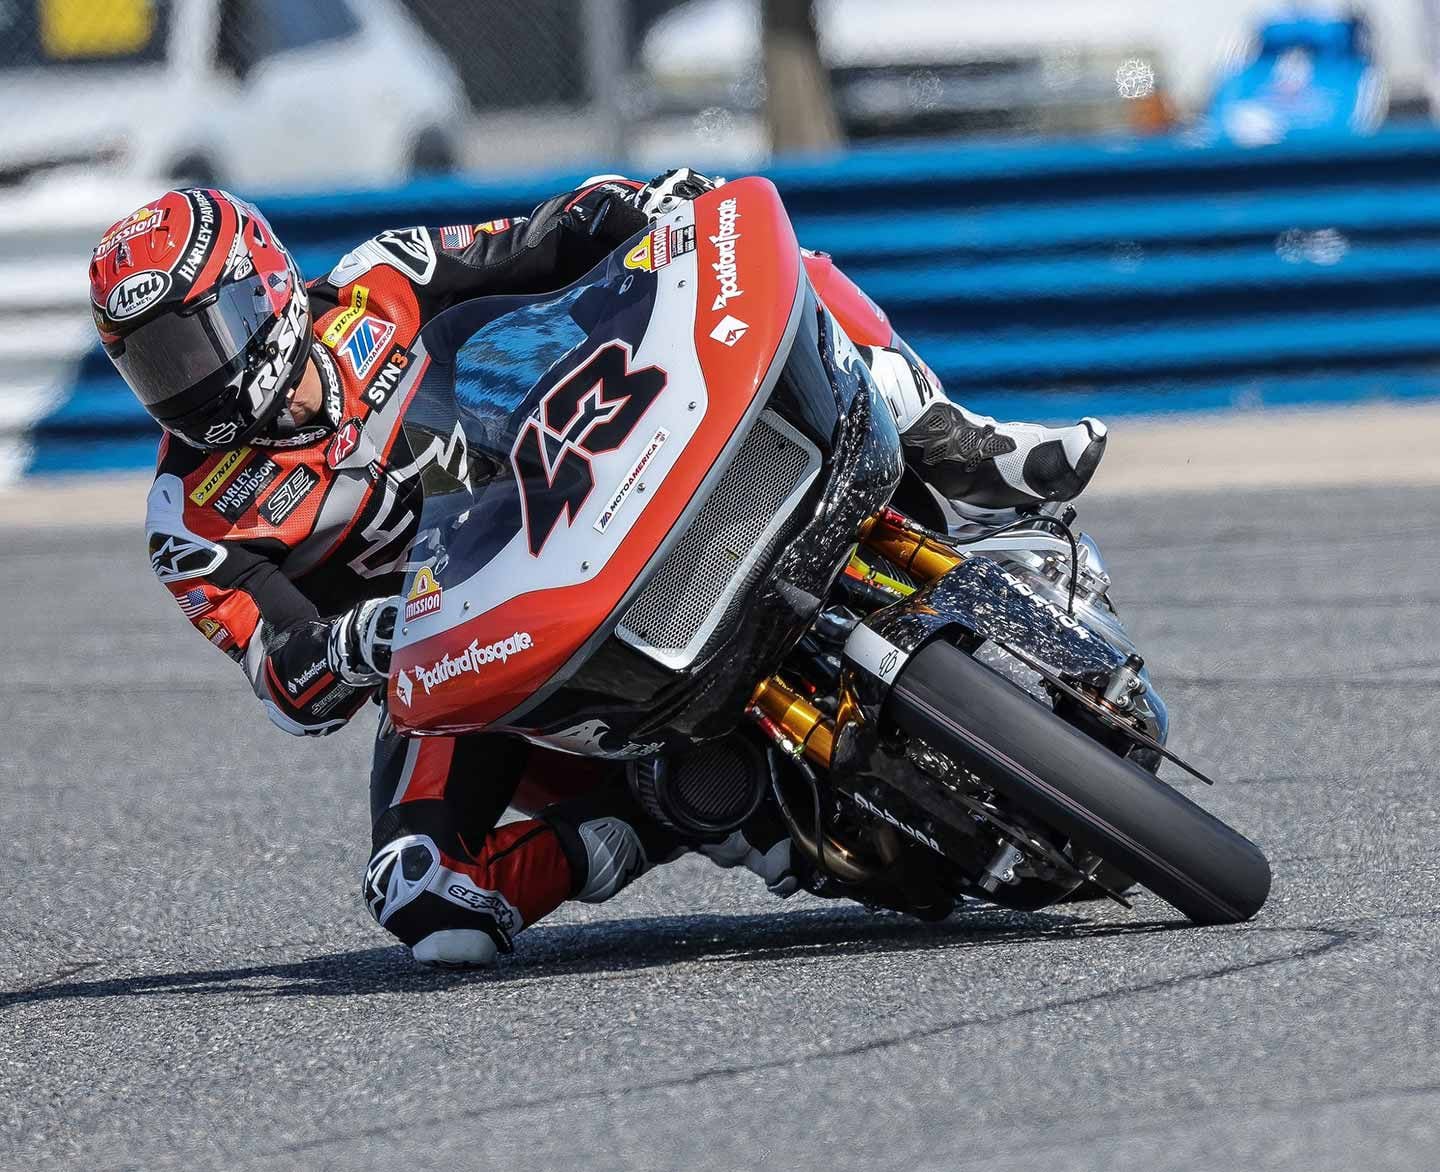 The King of the Baggers opening rounds were held at Daytona, with Harley Factory Racing rider Kyle Wyman winning the two races aboard the team’s new race-prepared 2024 Road Glide motorcycle. Teammate James Rispoli (pictured) finished third in both races.